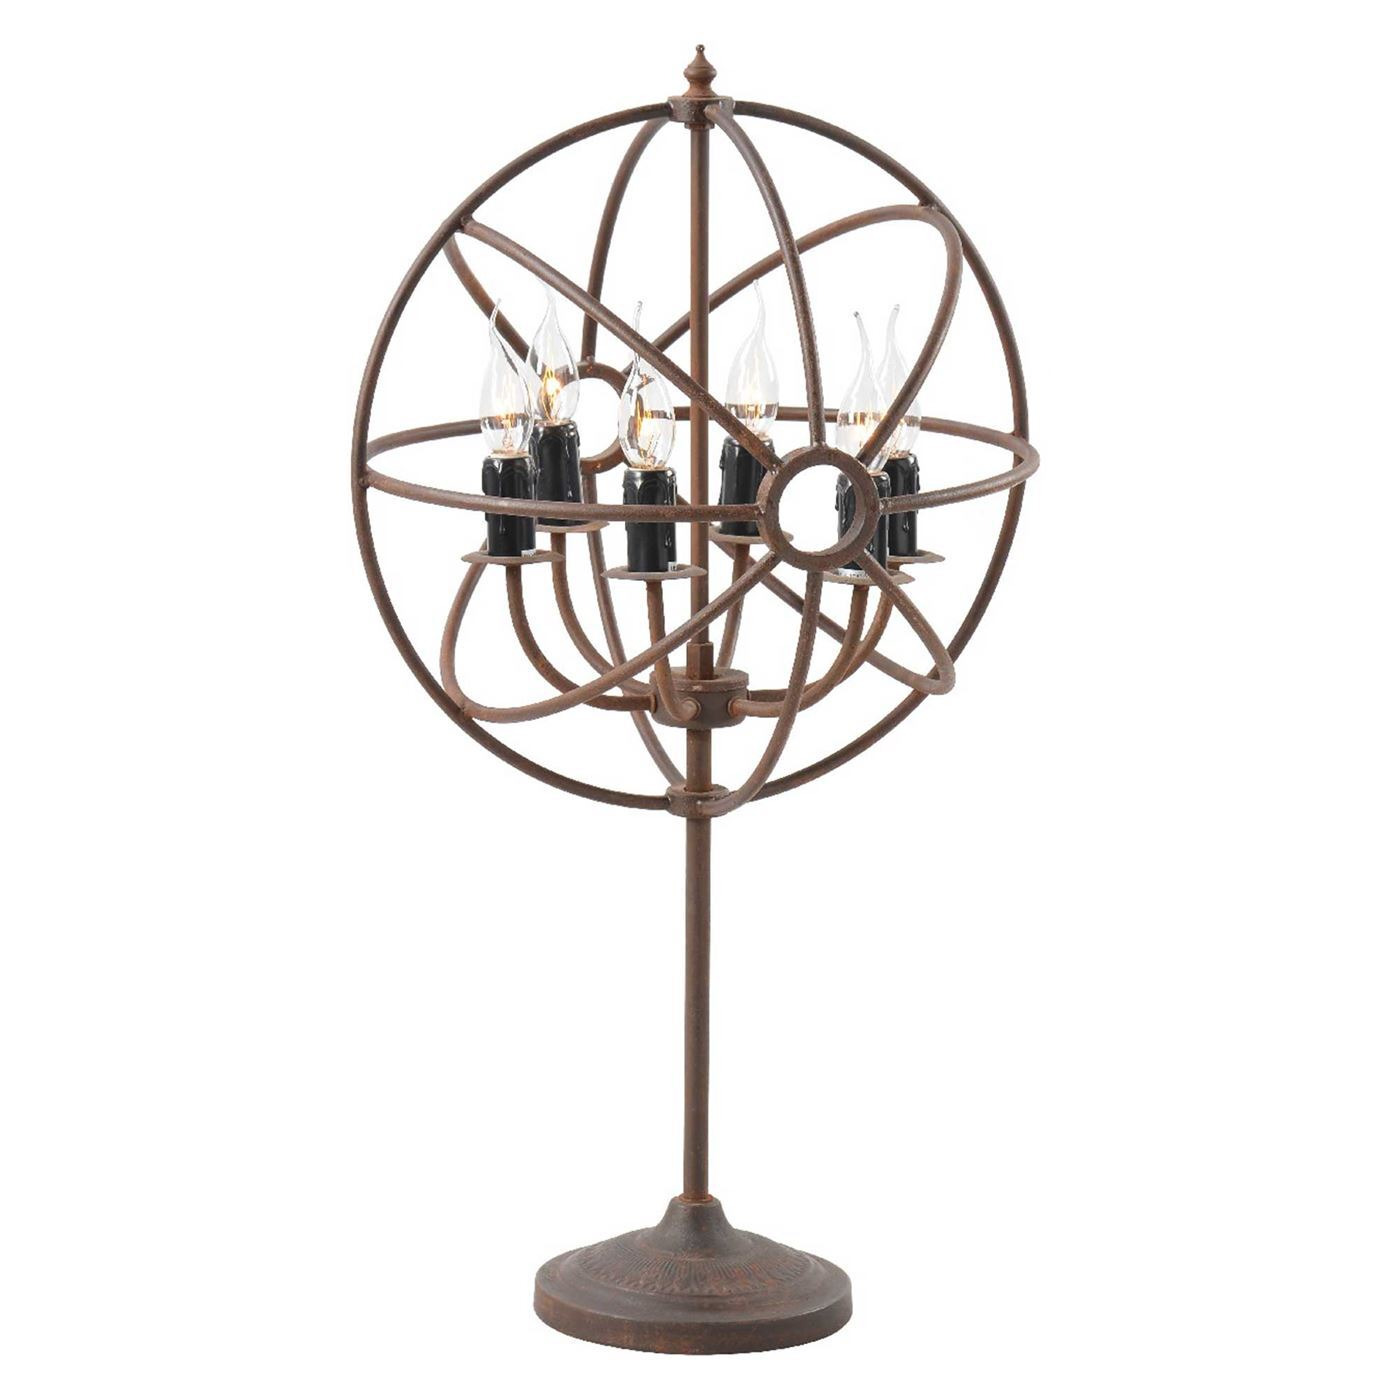 Timothy Oulton Gyro Table Lamp, Brown Metal - Barker & Stonehouse - image 1